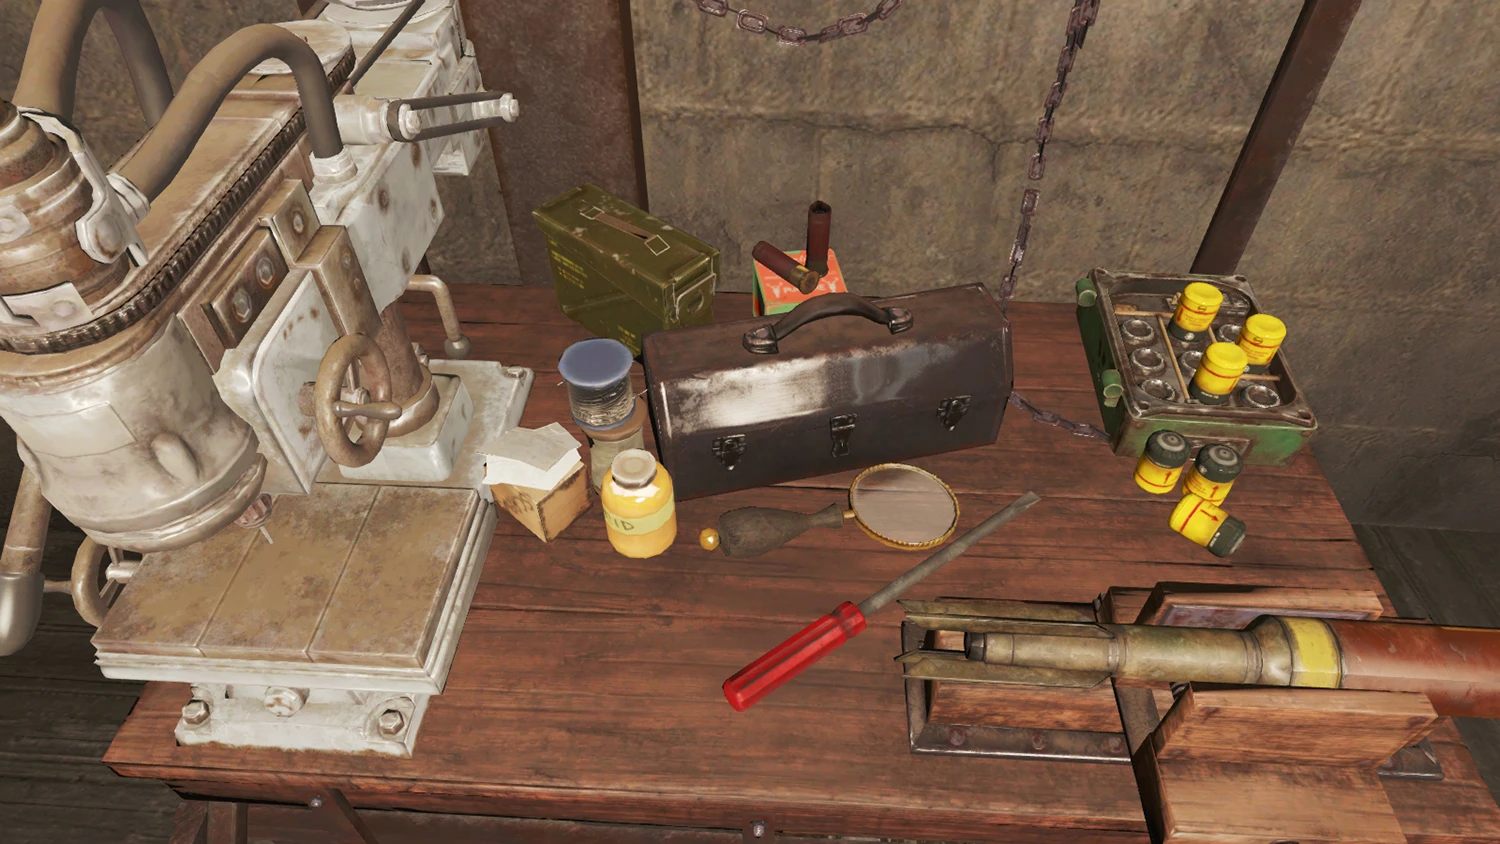 where to find .44 ammo fallout 4